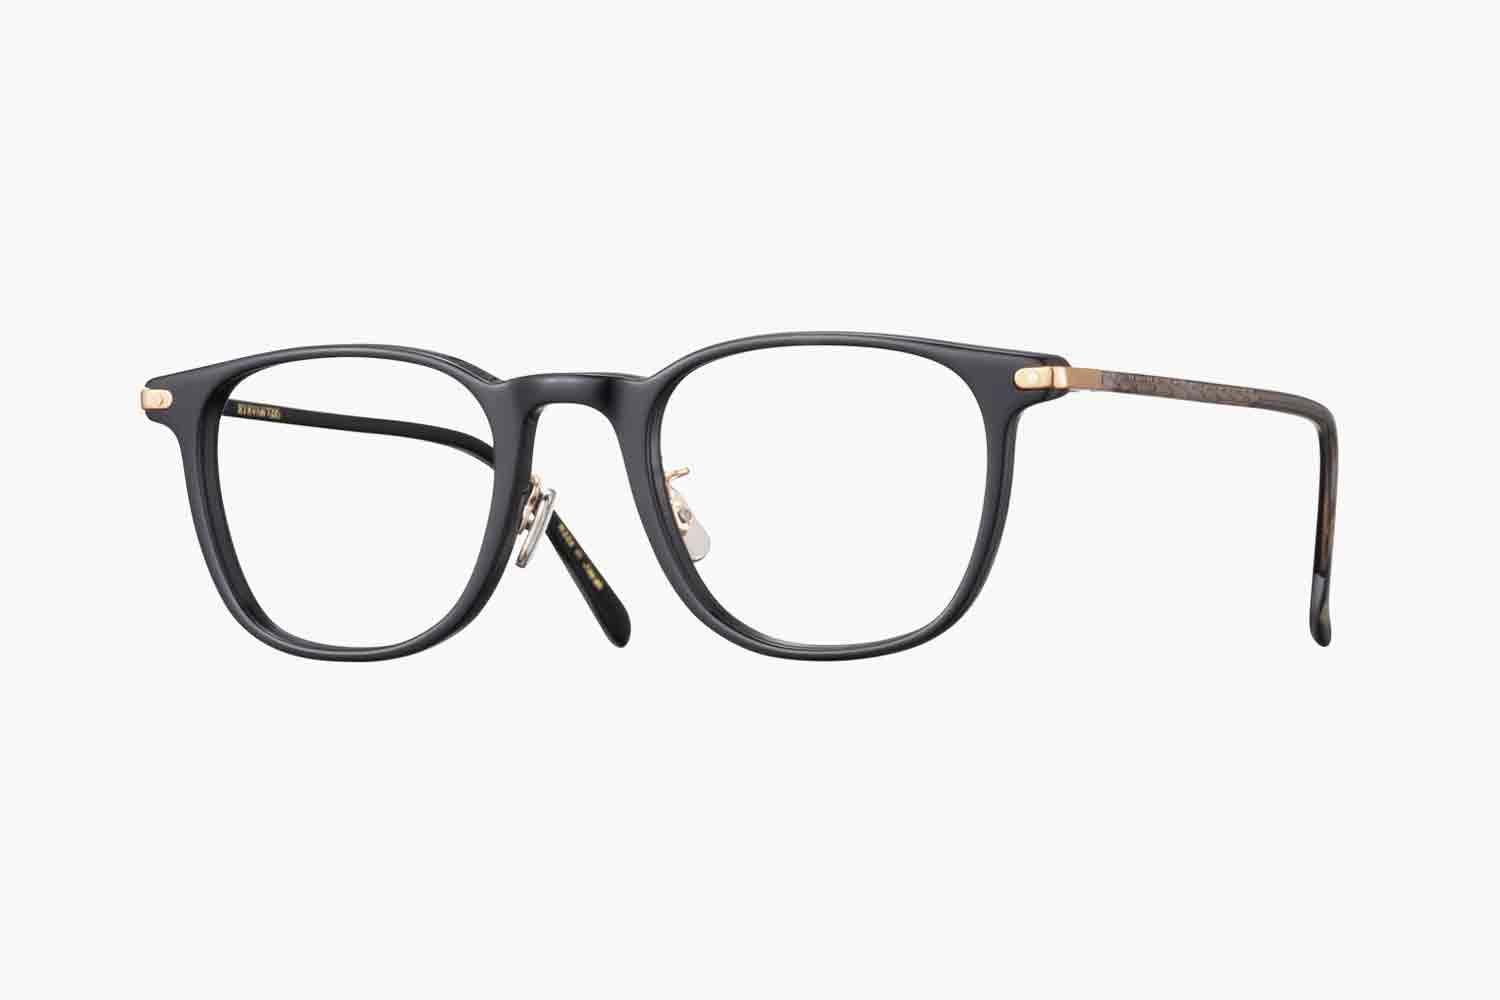 EYEVAN 7285｜8th｜318 - 100｜PRODUCT｜Continuer Inc.｜メガネ